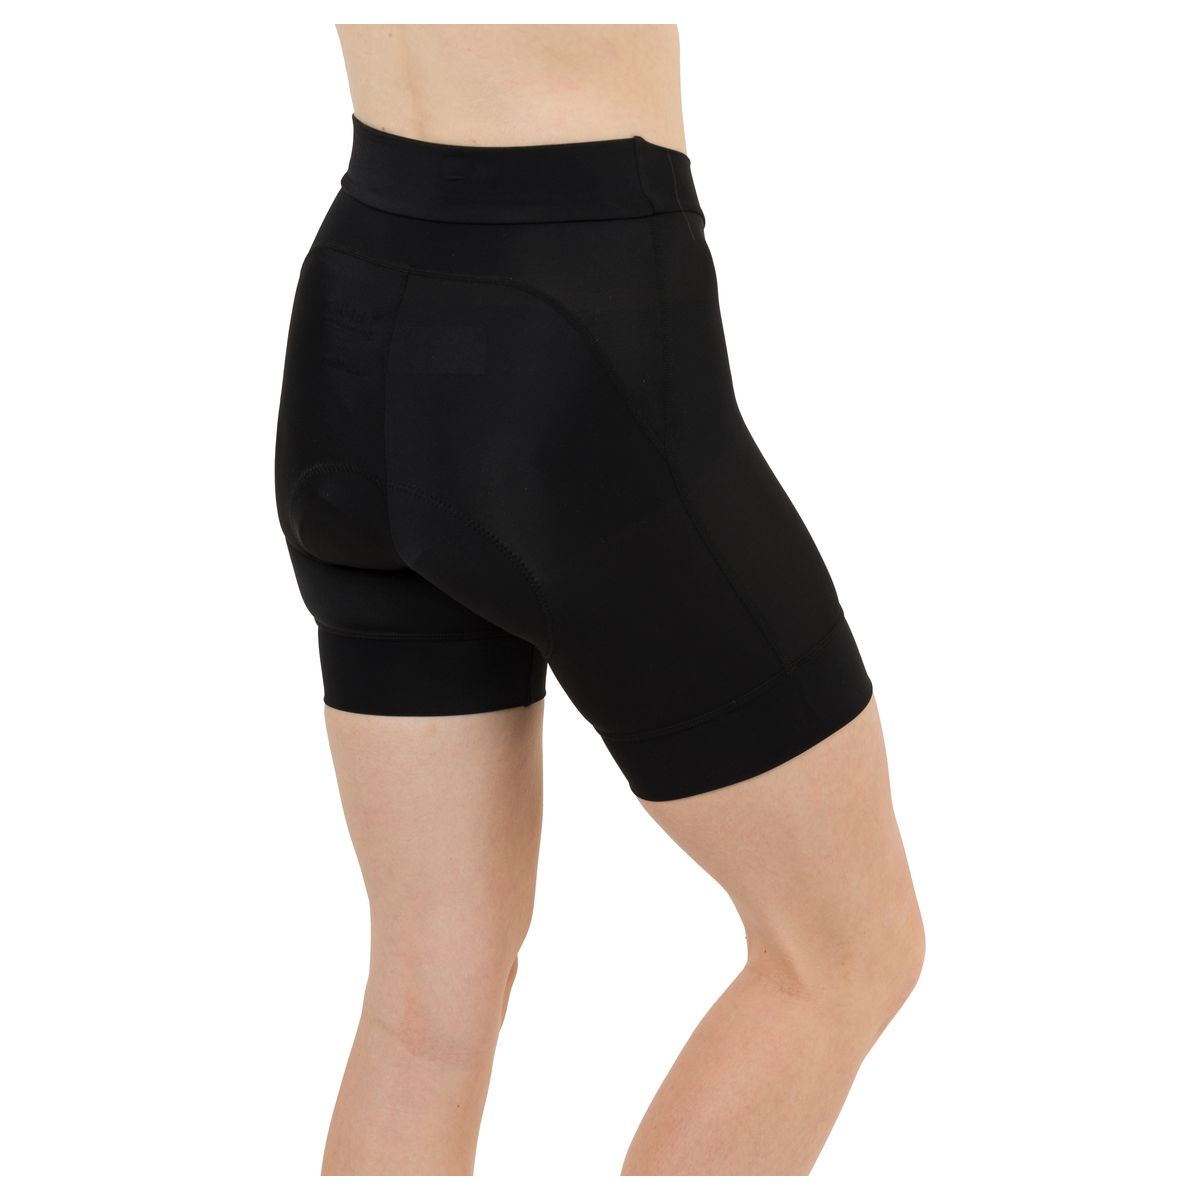 Shorty II Essential Femme fit example